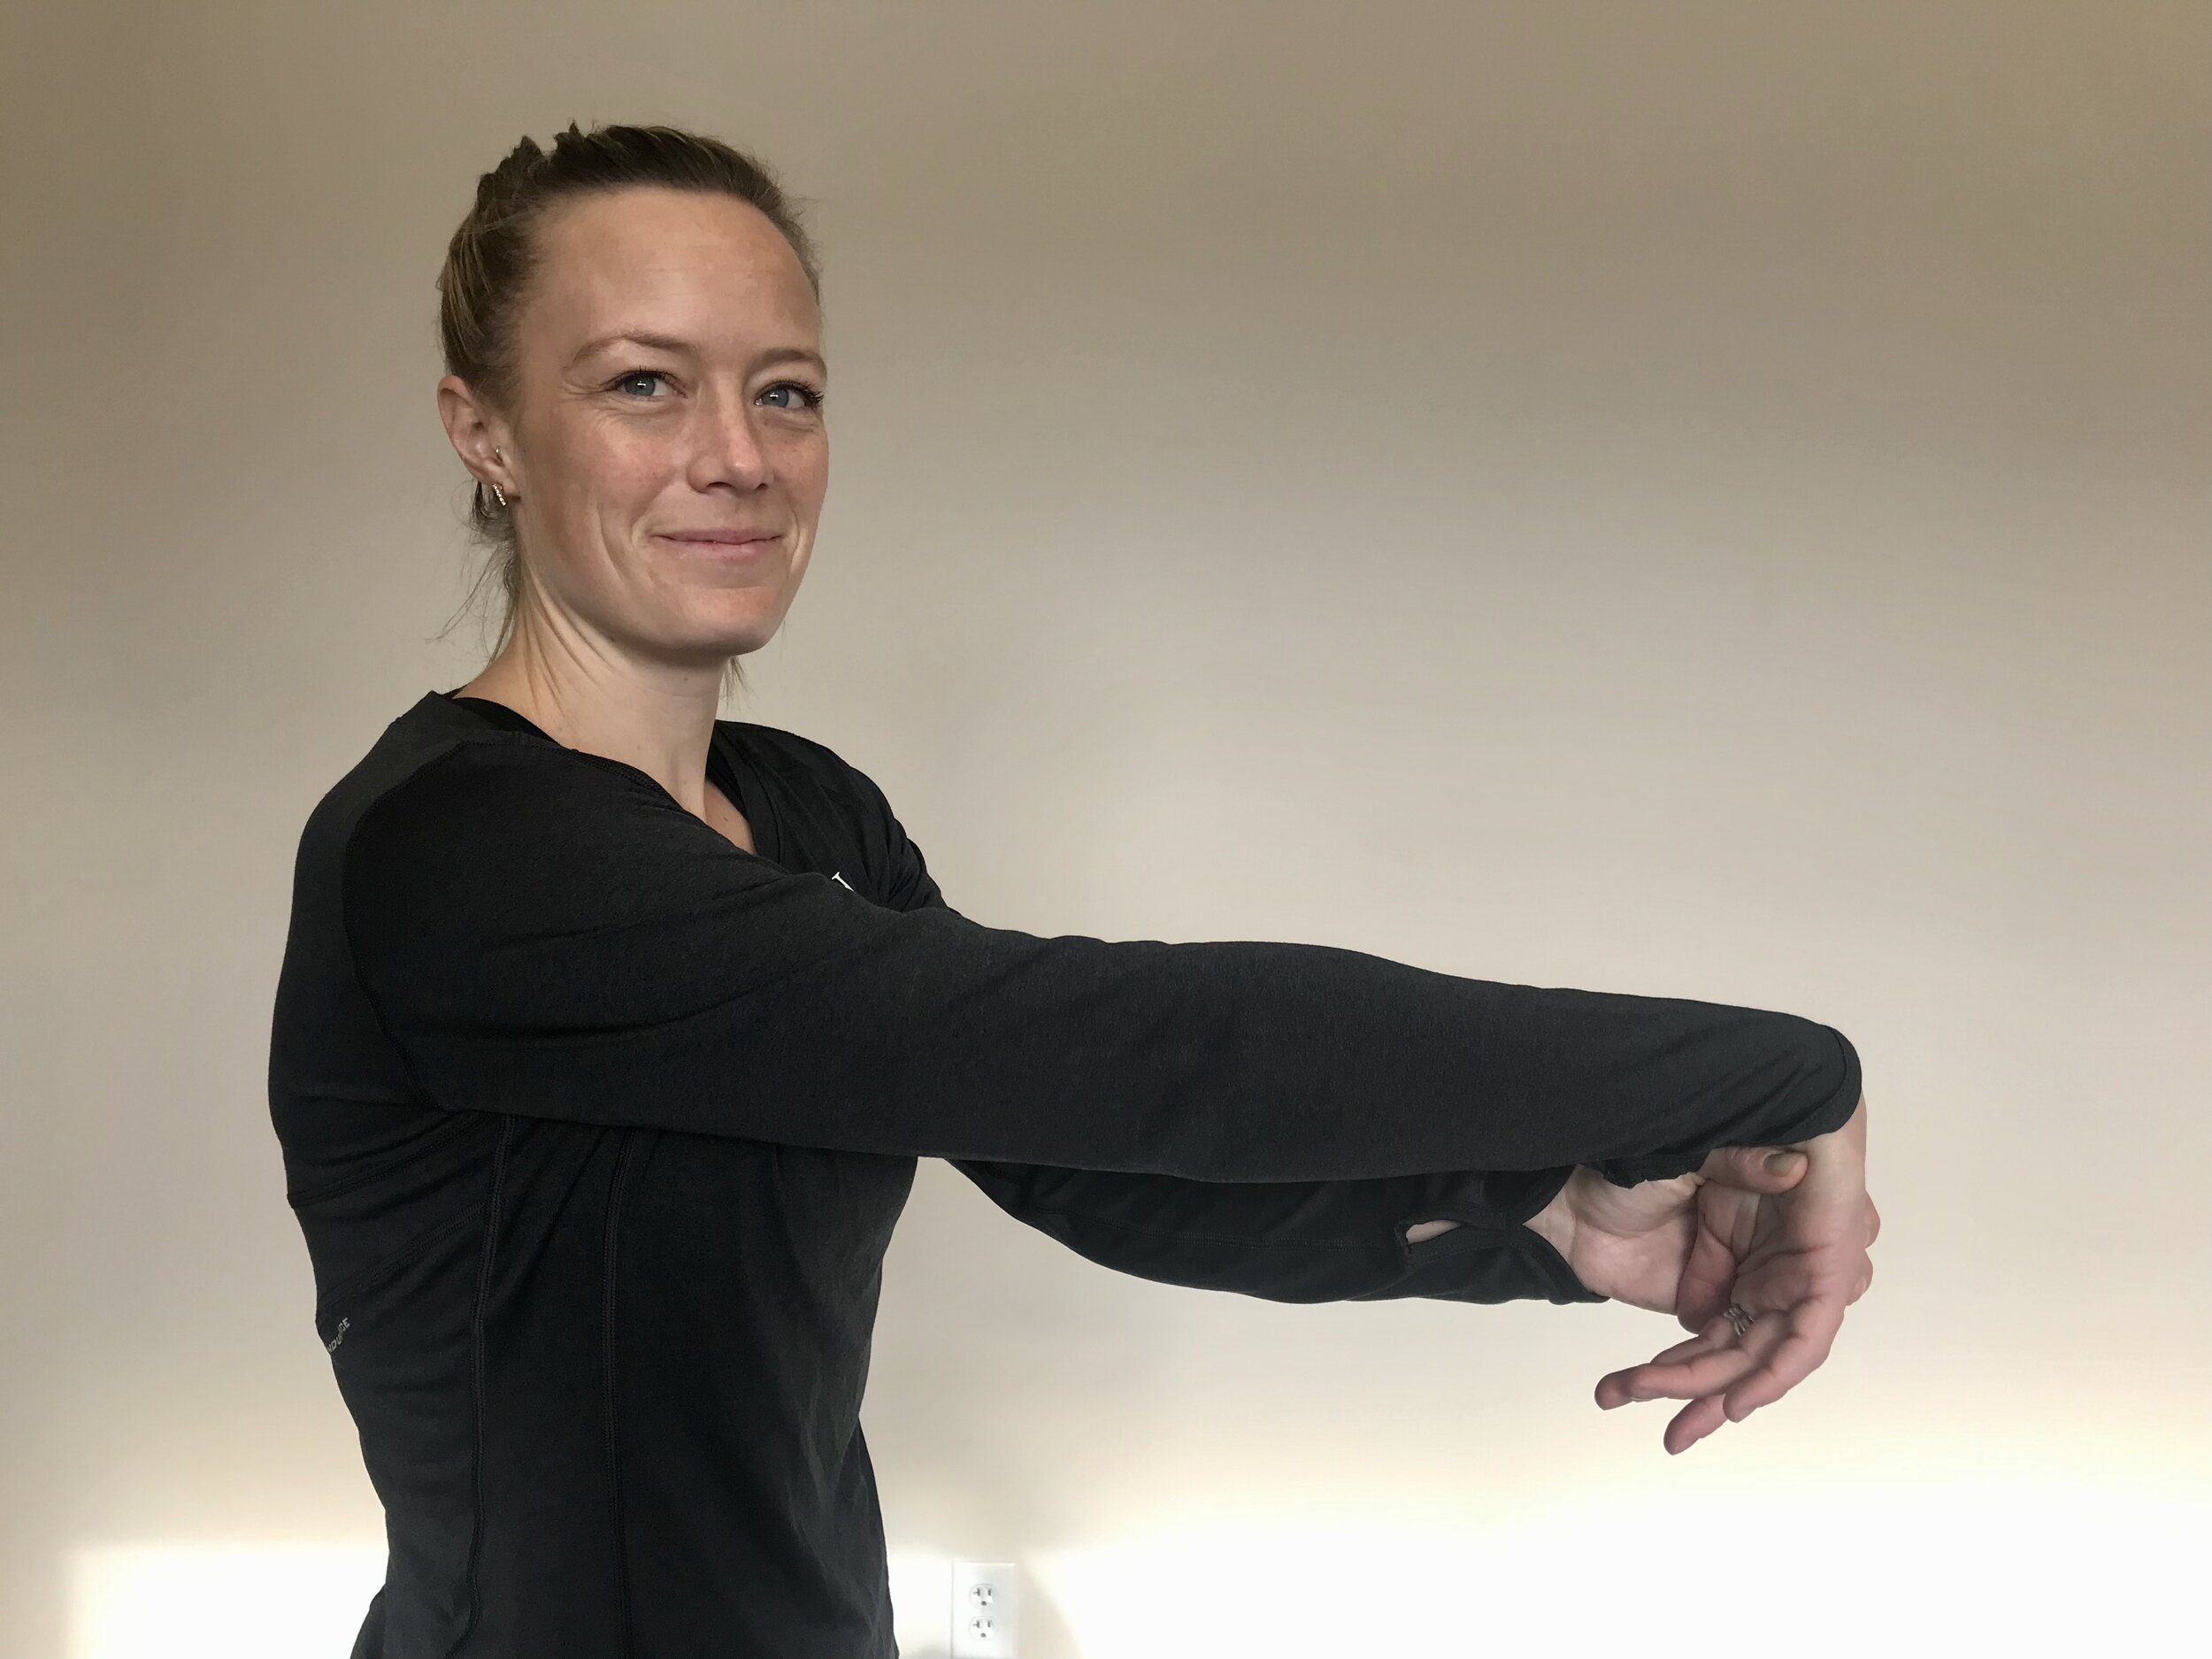 Forearm flexion stretch: Straighten your arm out in front of you, keep your elbow straight and with your other hand gently bend your wrist and fingers until a gentle stretch is felt.